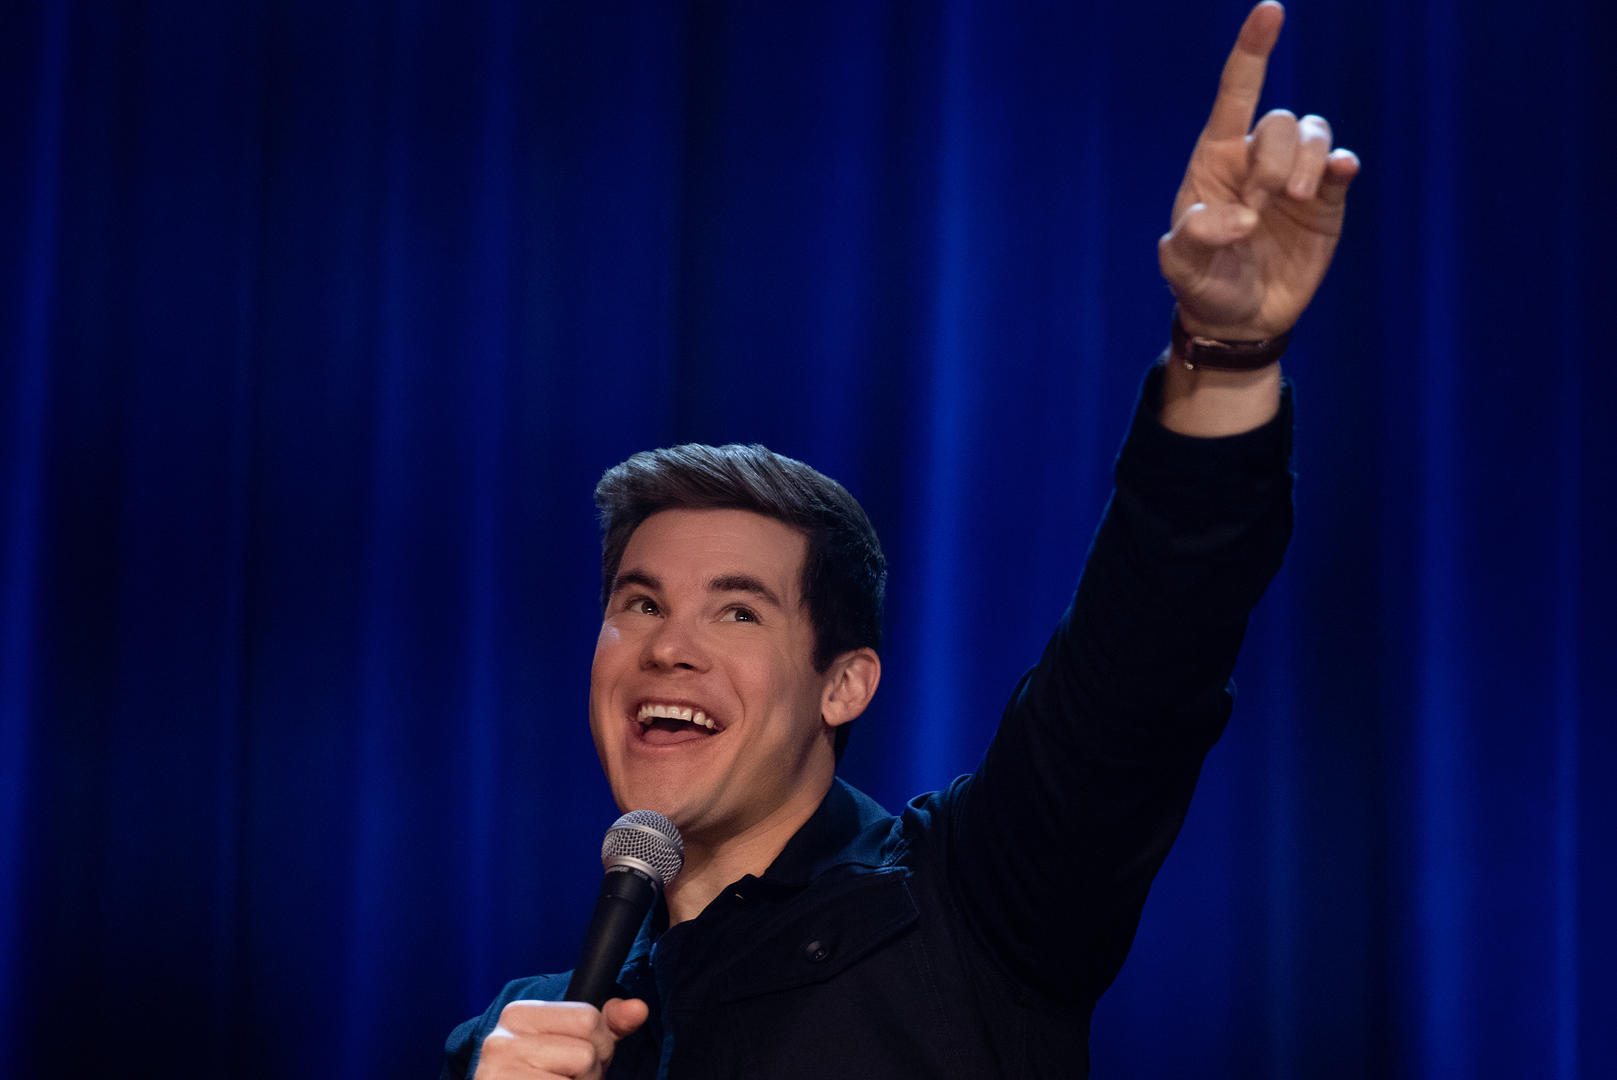 Adam Devine: Best Time of Our Lives